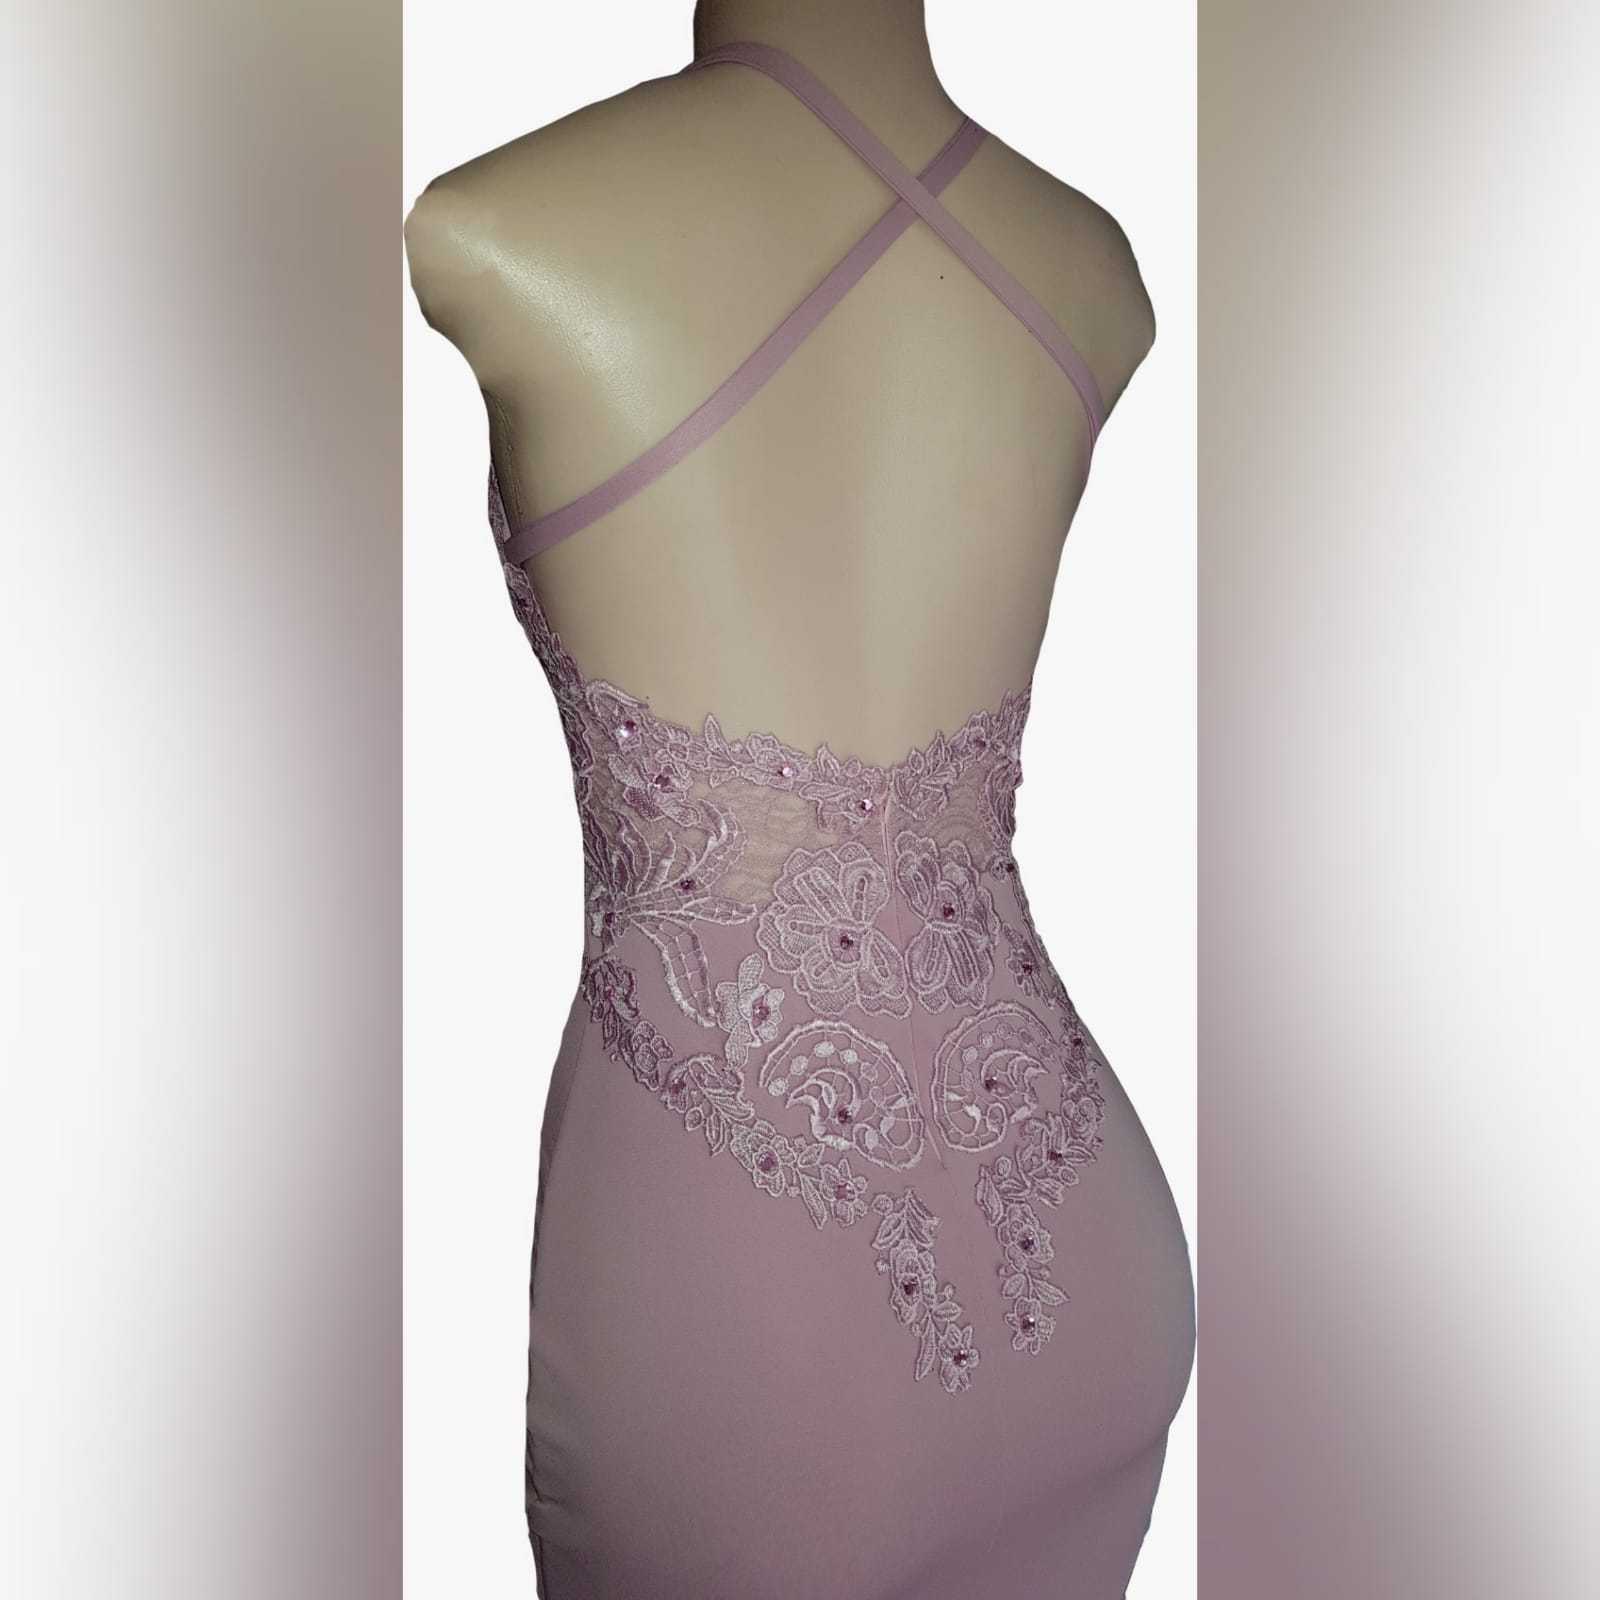 Pink sexy soft mermaid prom dress 7 look ravishing on your prom night with this pink sexy soft mermaid prom dress. A fitted lace bodice with a plunging neckline, low back and a train to add some glamour to your important event.